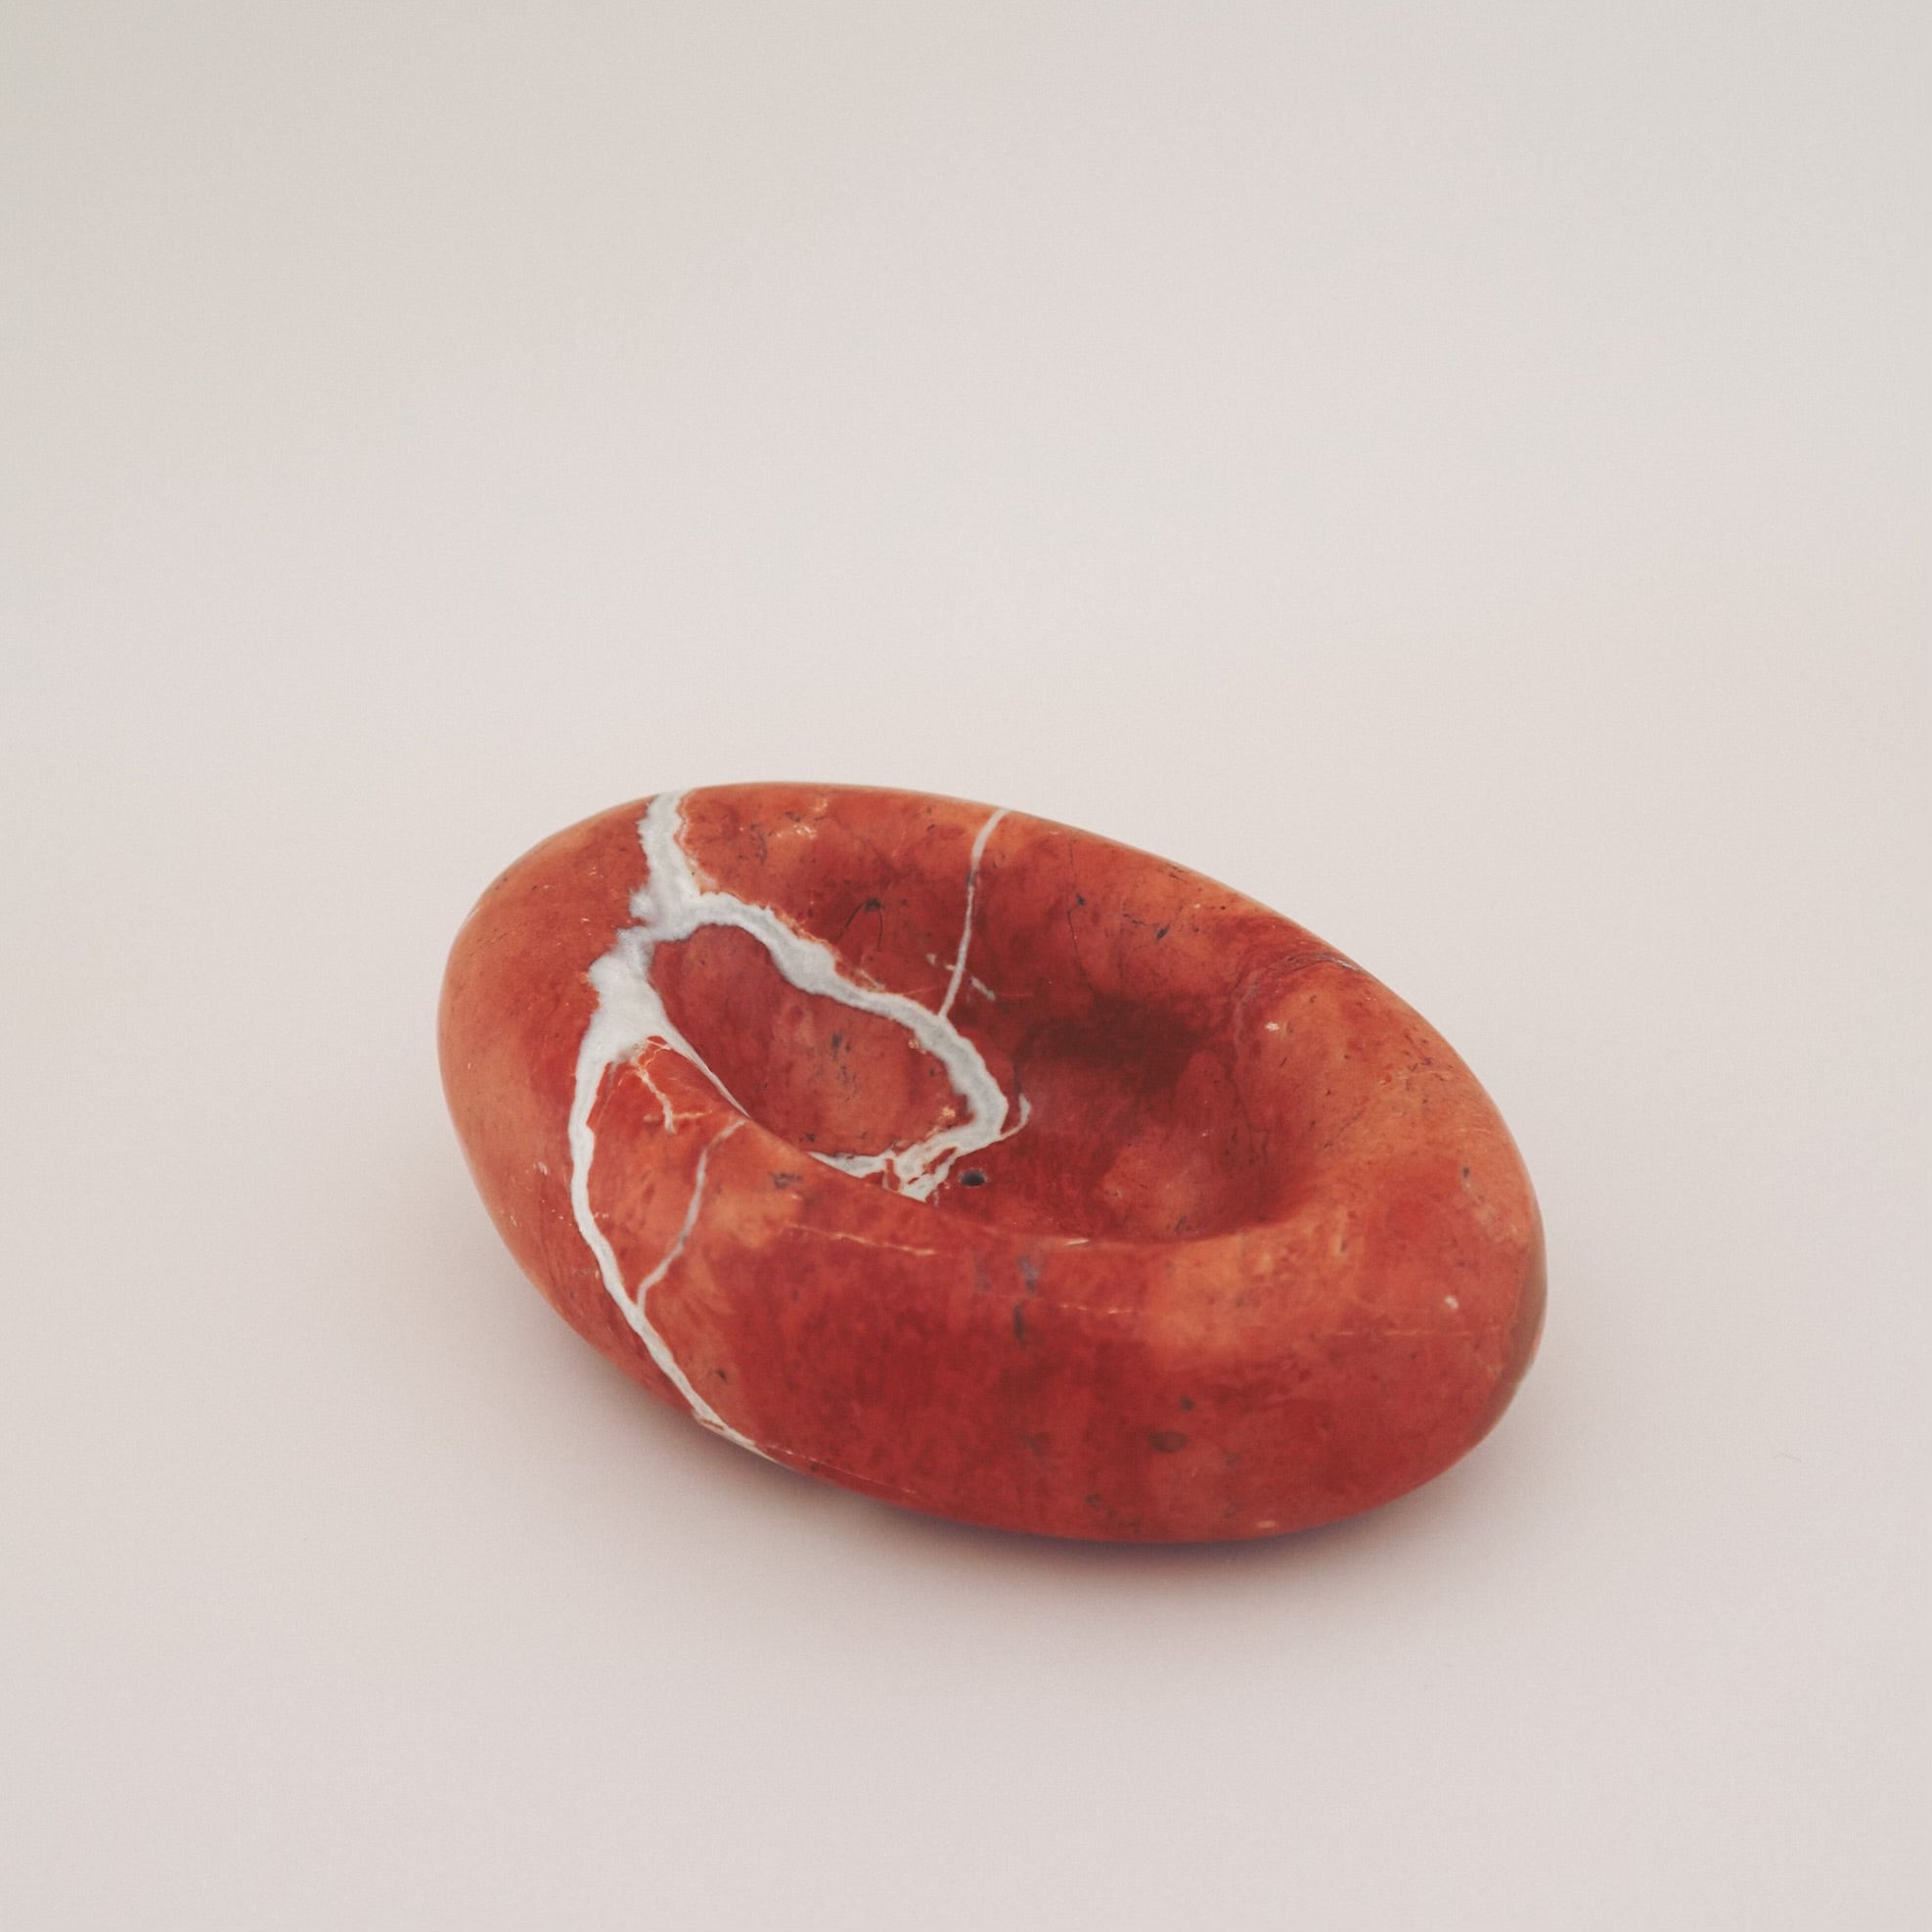 COTHEORY ECLIPSE SCULPTED INCENSE HOLDER BOWL: ROSSO ALICANTE